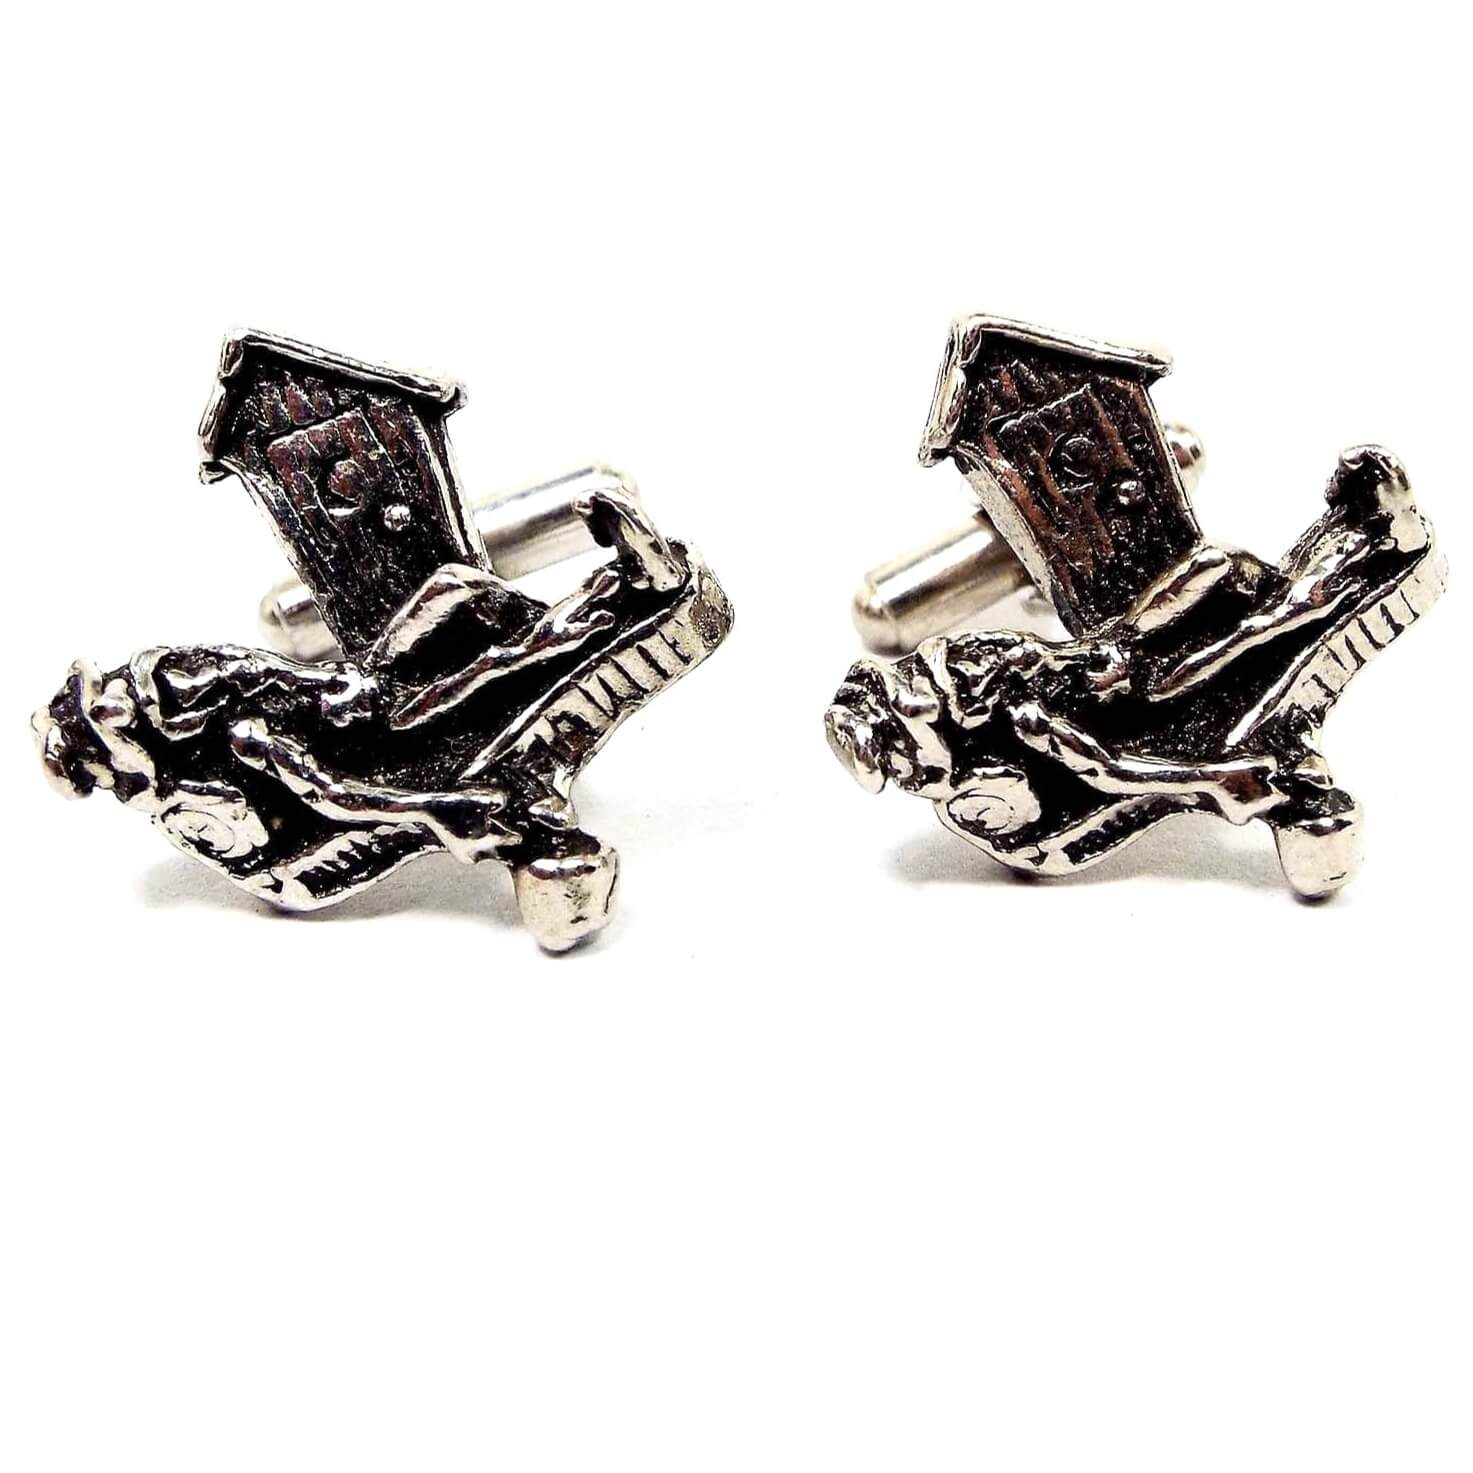 Front view of the Mid Century vintage Hillbilly cufflinks. They are antiqued silver tone in color. There is a mountain man type person with beard and mustache and hat laying on the front with a bedroll holding his jug of spirits. He is laying in front of an outhouse.